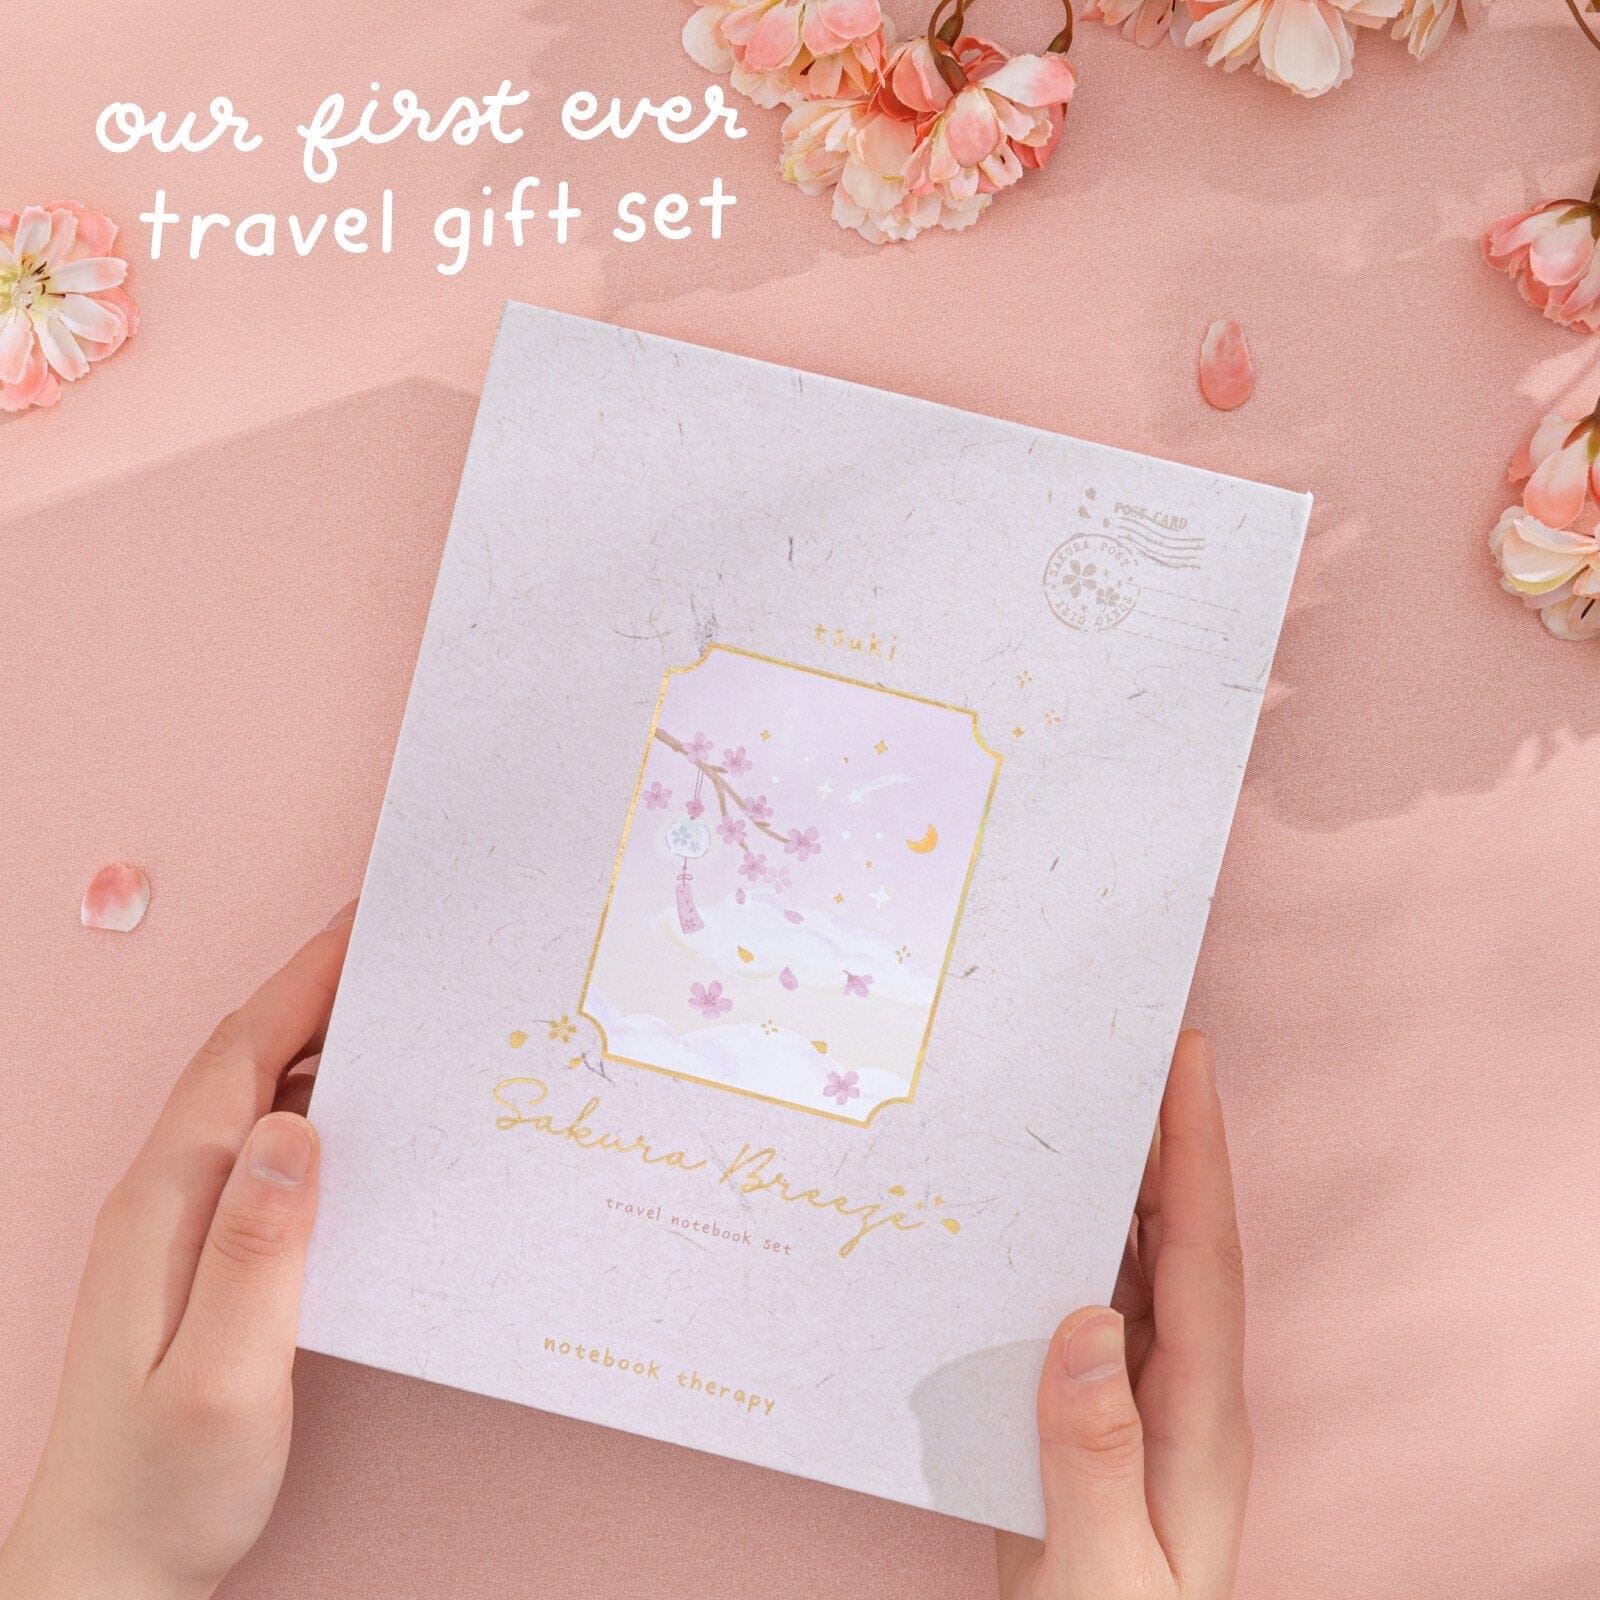 Hands holding Sakura Breeze travel gift sset box with tex “our first ever travel gift set”